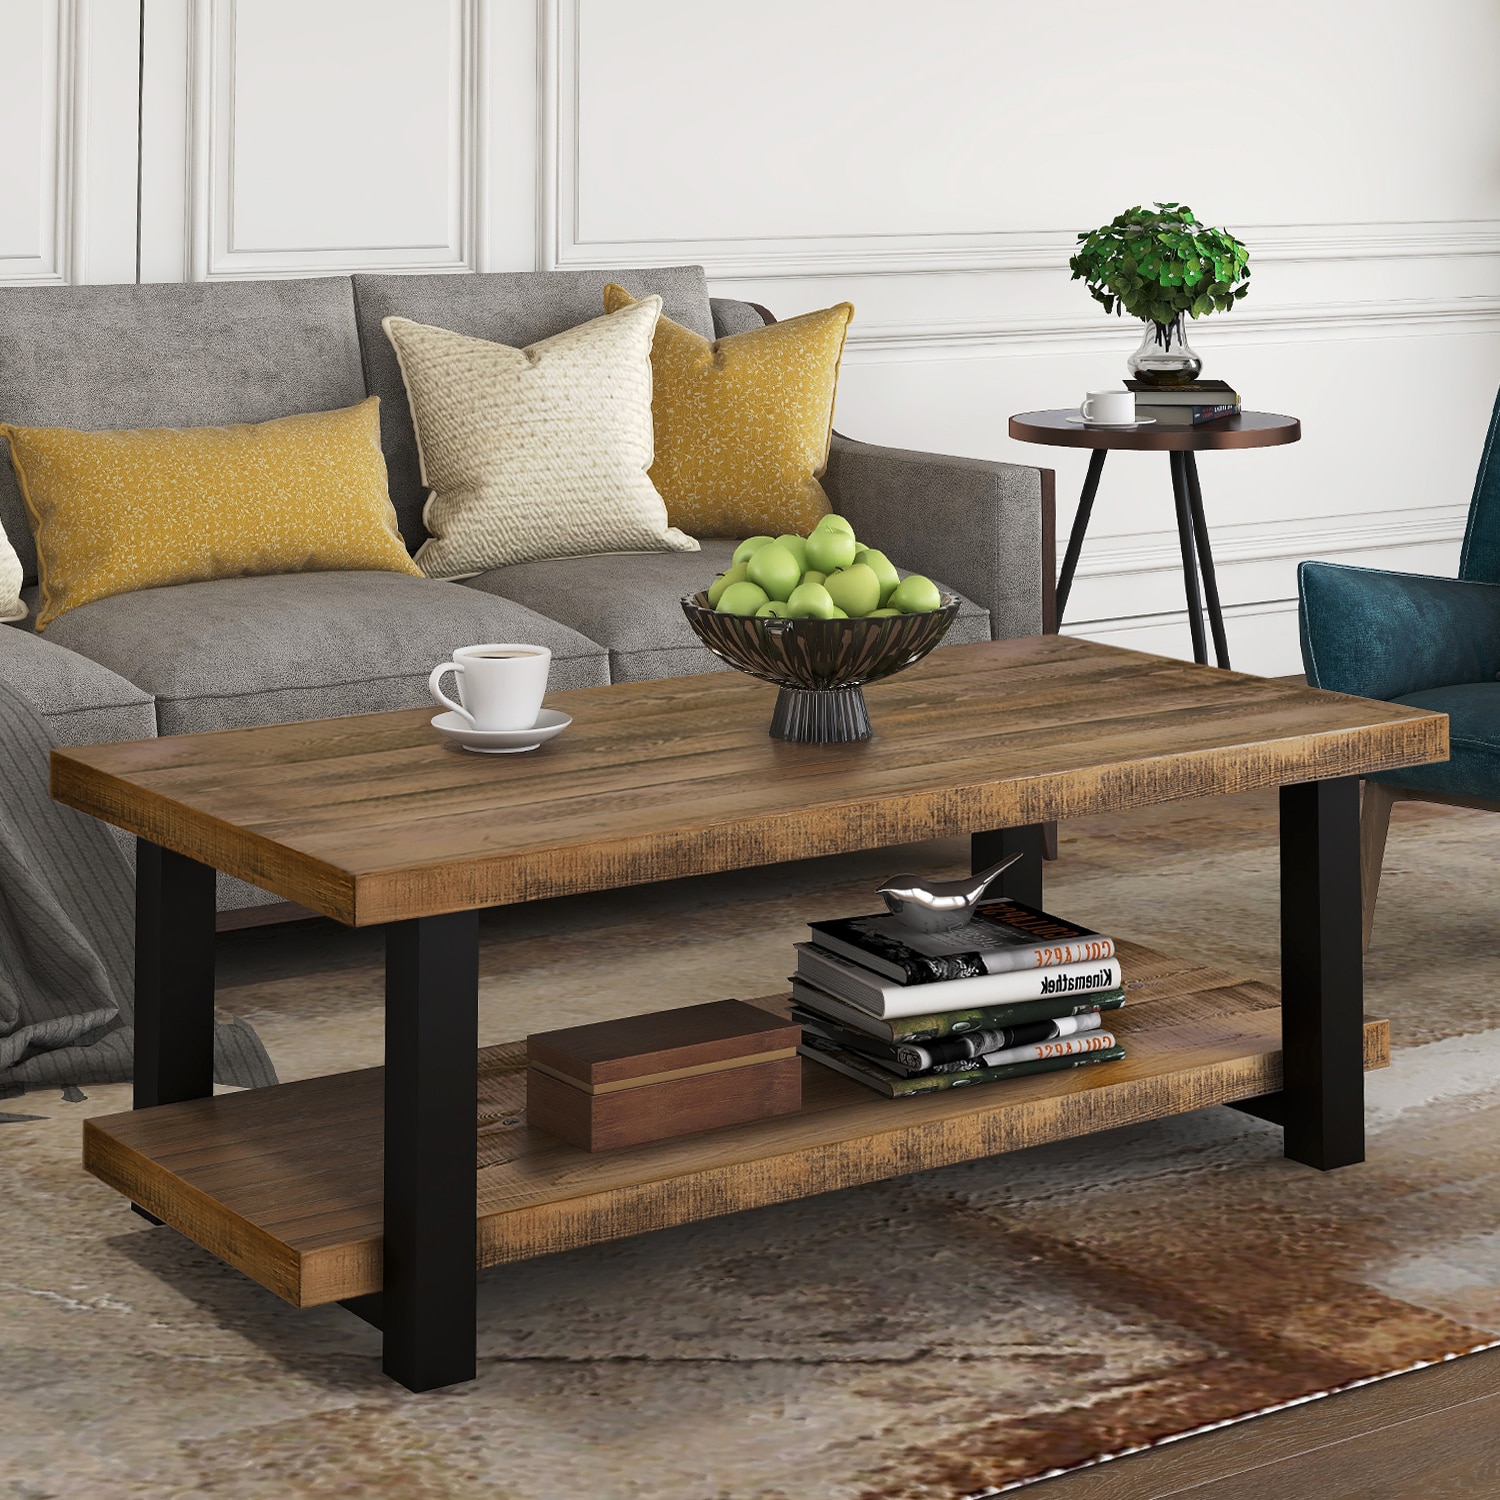 Rustic Natural Coffee Table With Storage Shelf Table